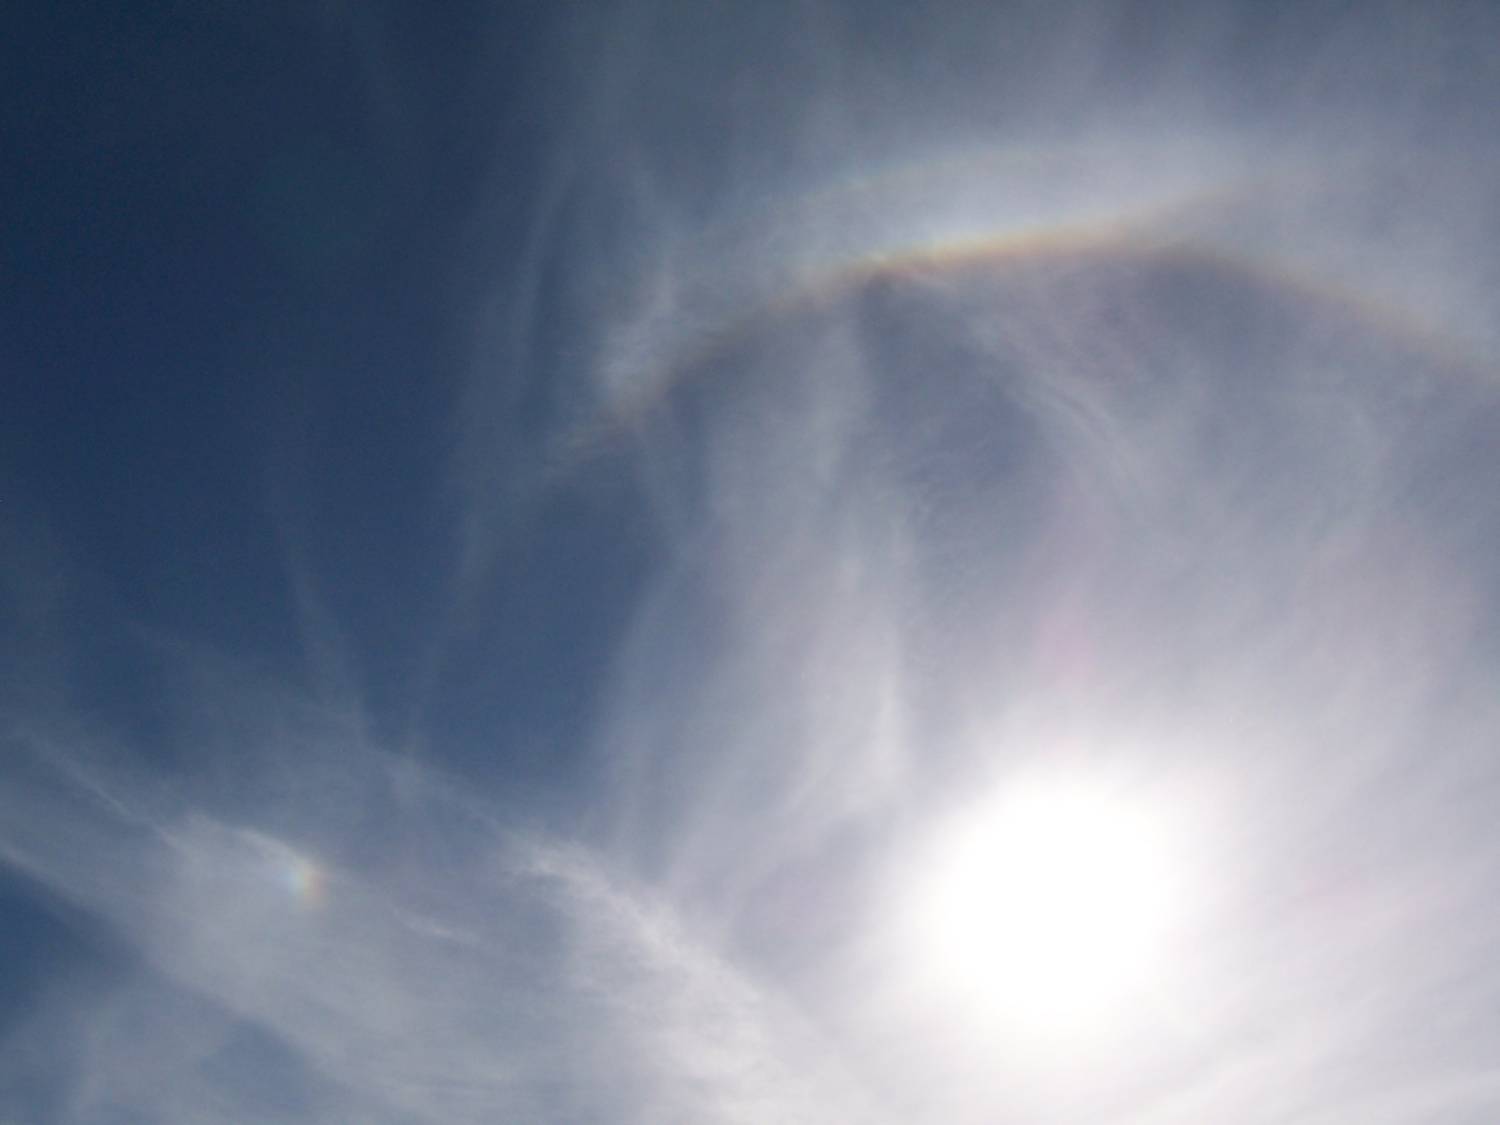 Solar circle with sundog and Parry arc: 54 KB; click on the image to enlarge